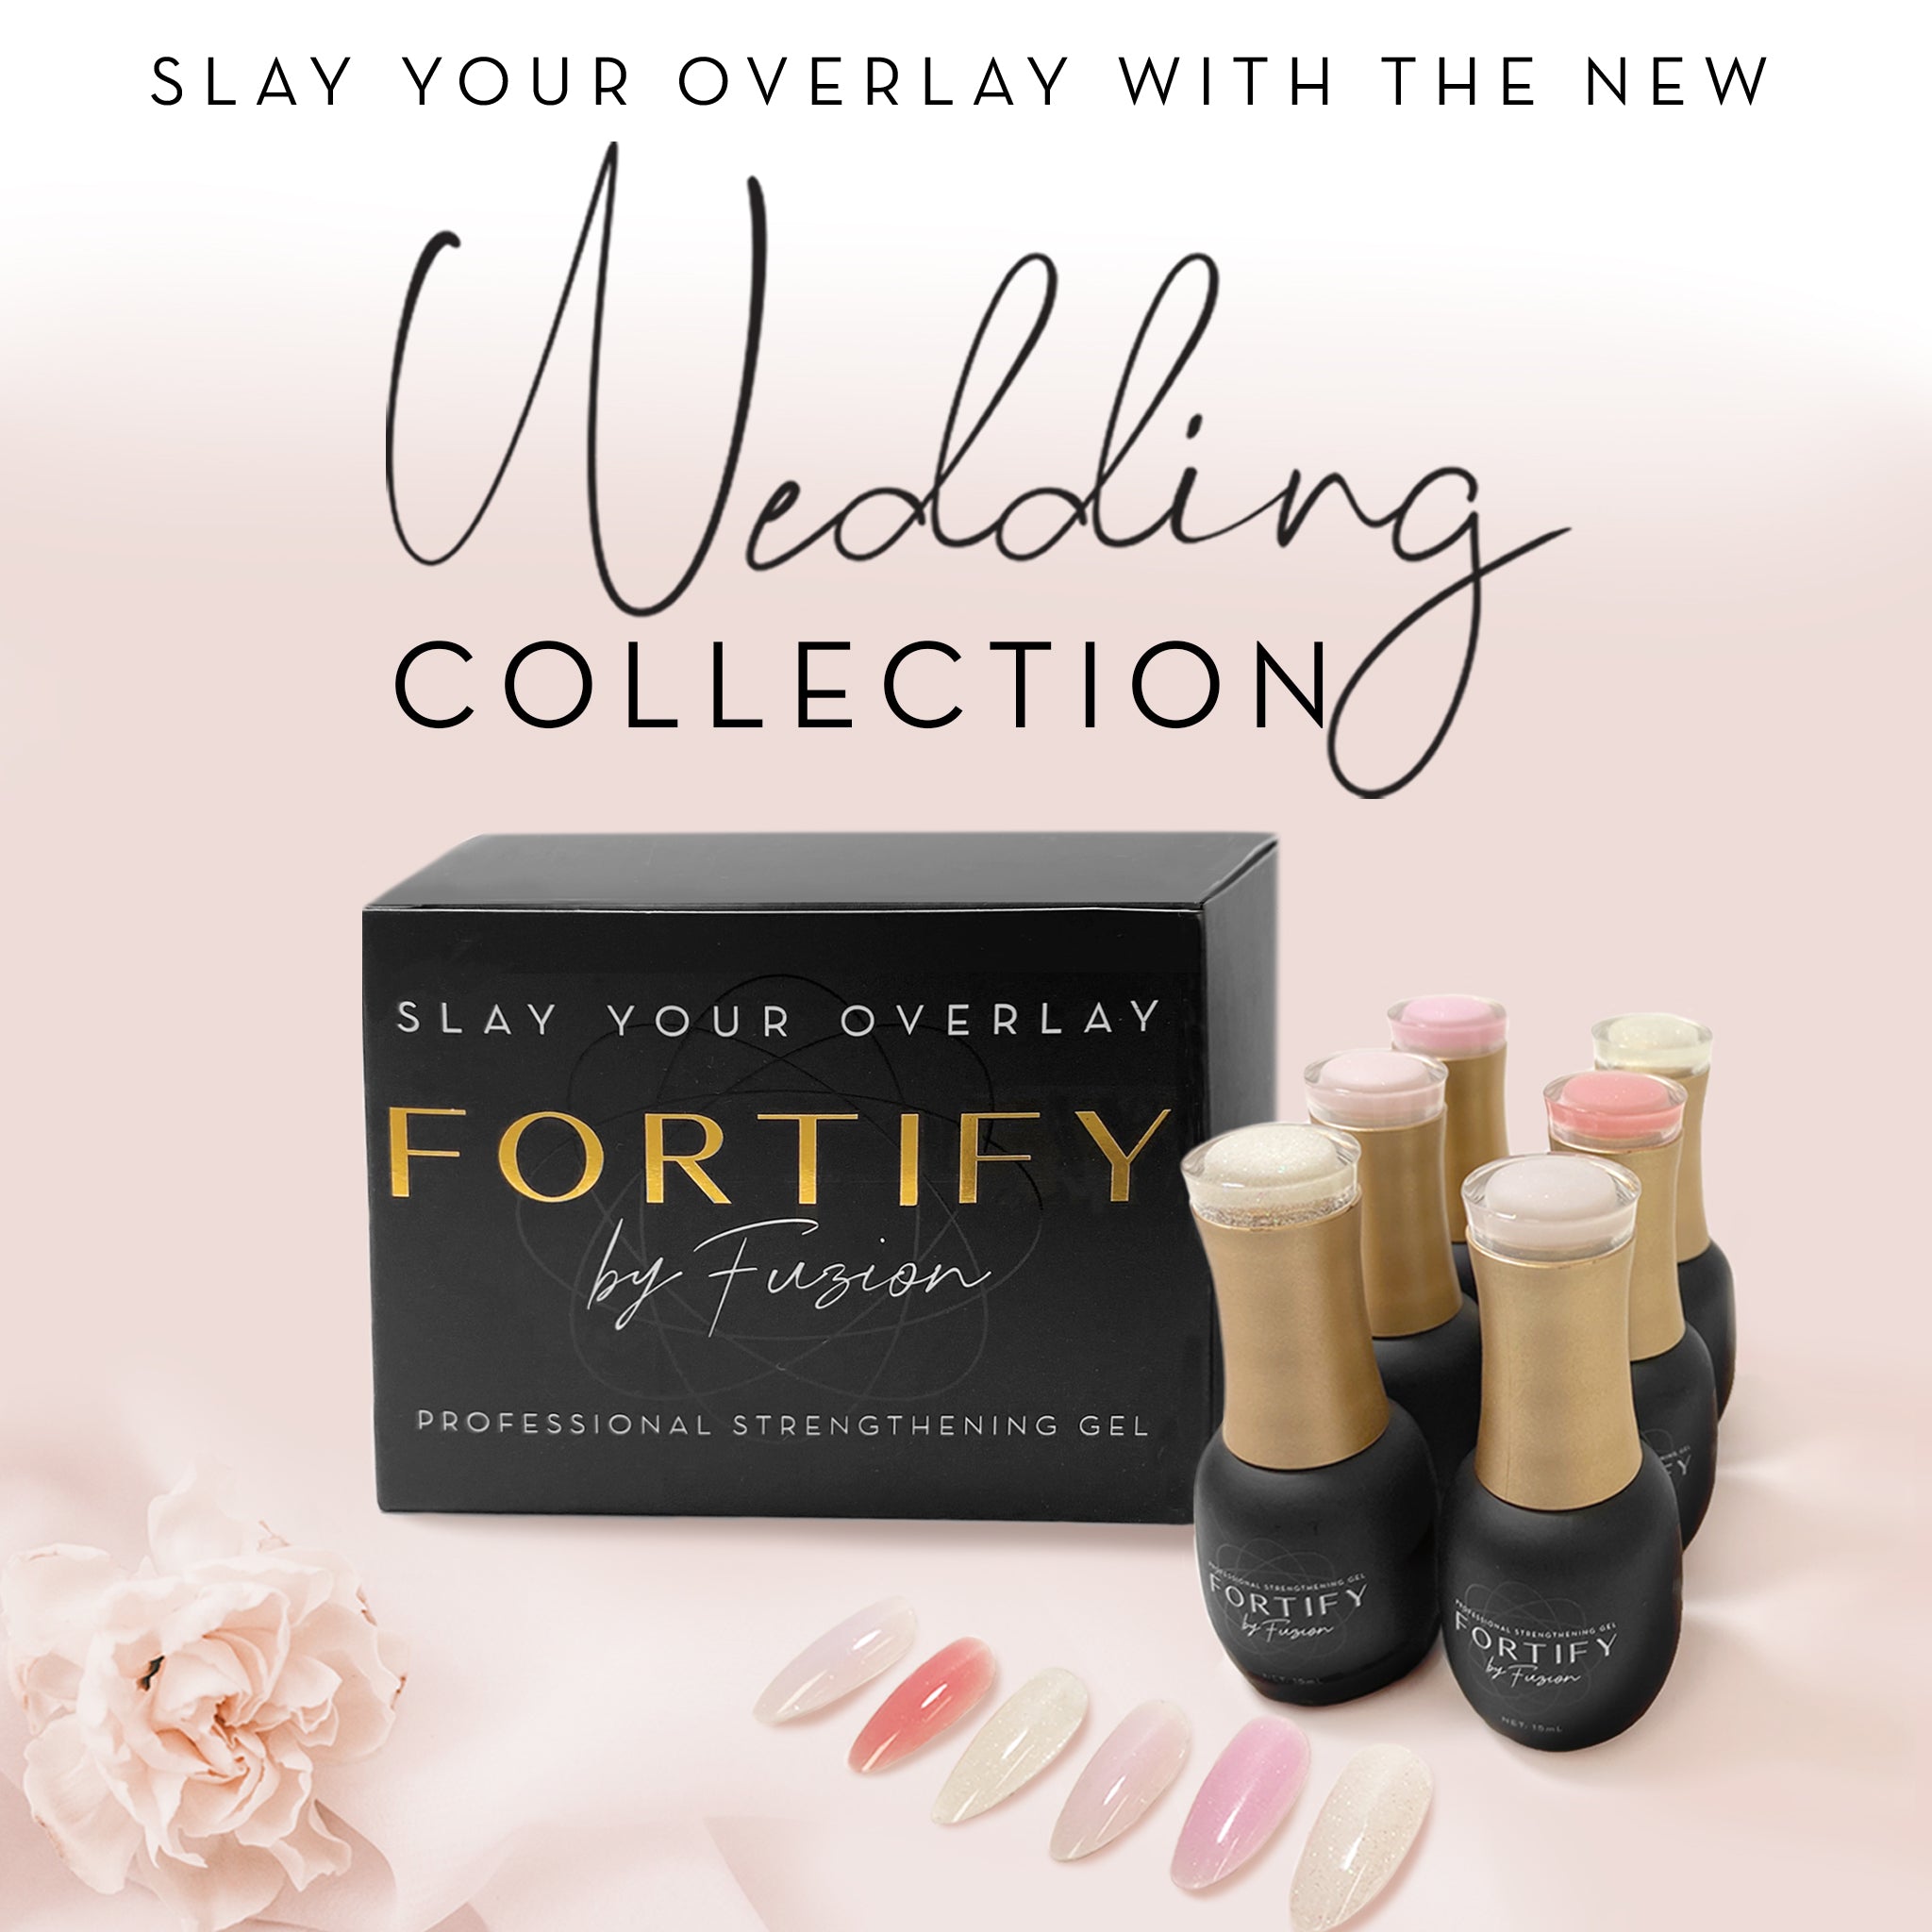 Fuzion Fortify Kit - Wedding Collection - Creata Beauty - Professional Beauty Products